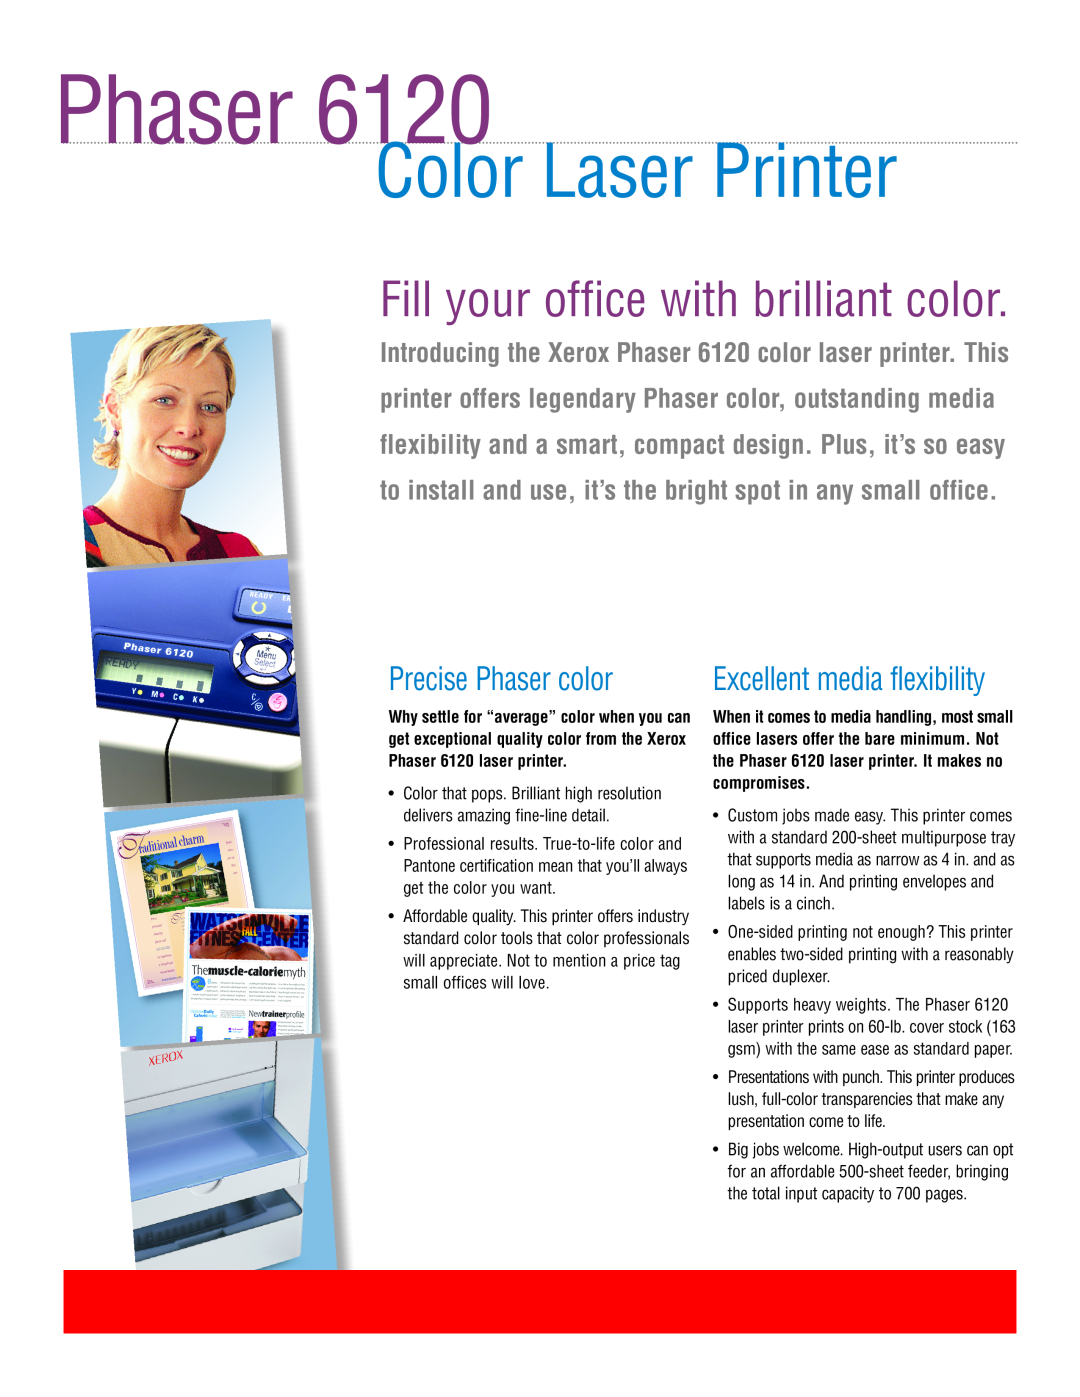 Xerox 6120N Precise Phaser color, Color Laser Printer, Fill your office with brilliant color, Excellent media flexibility 